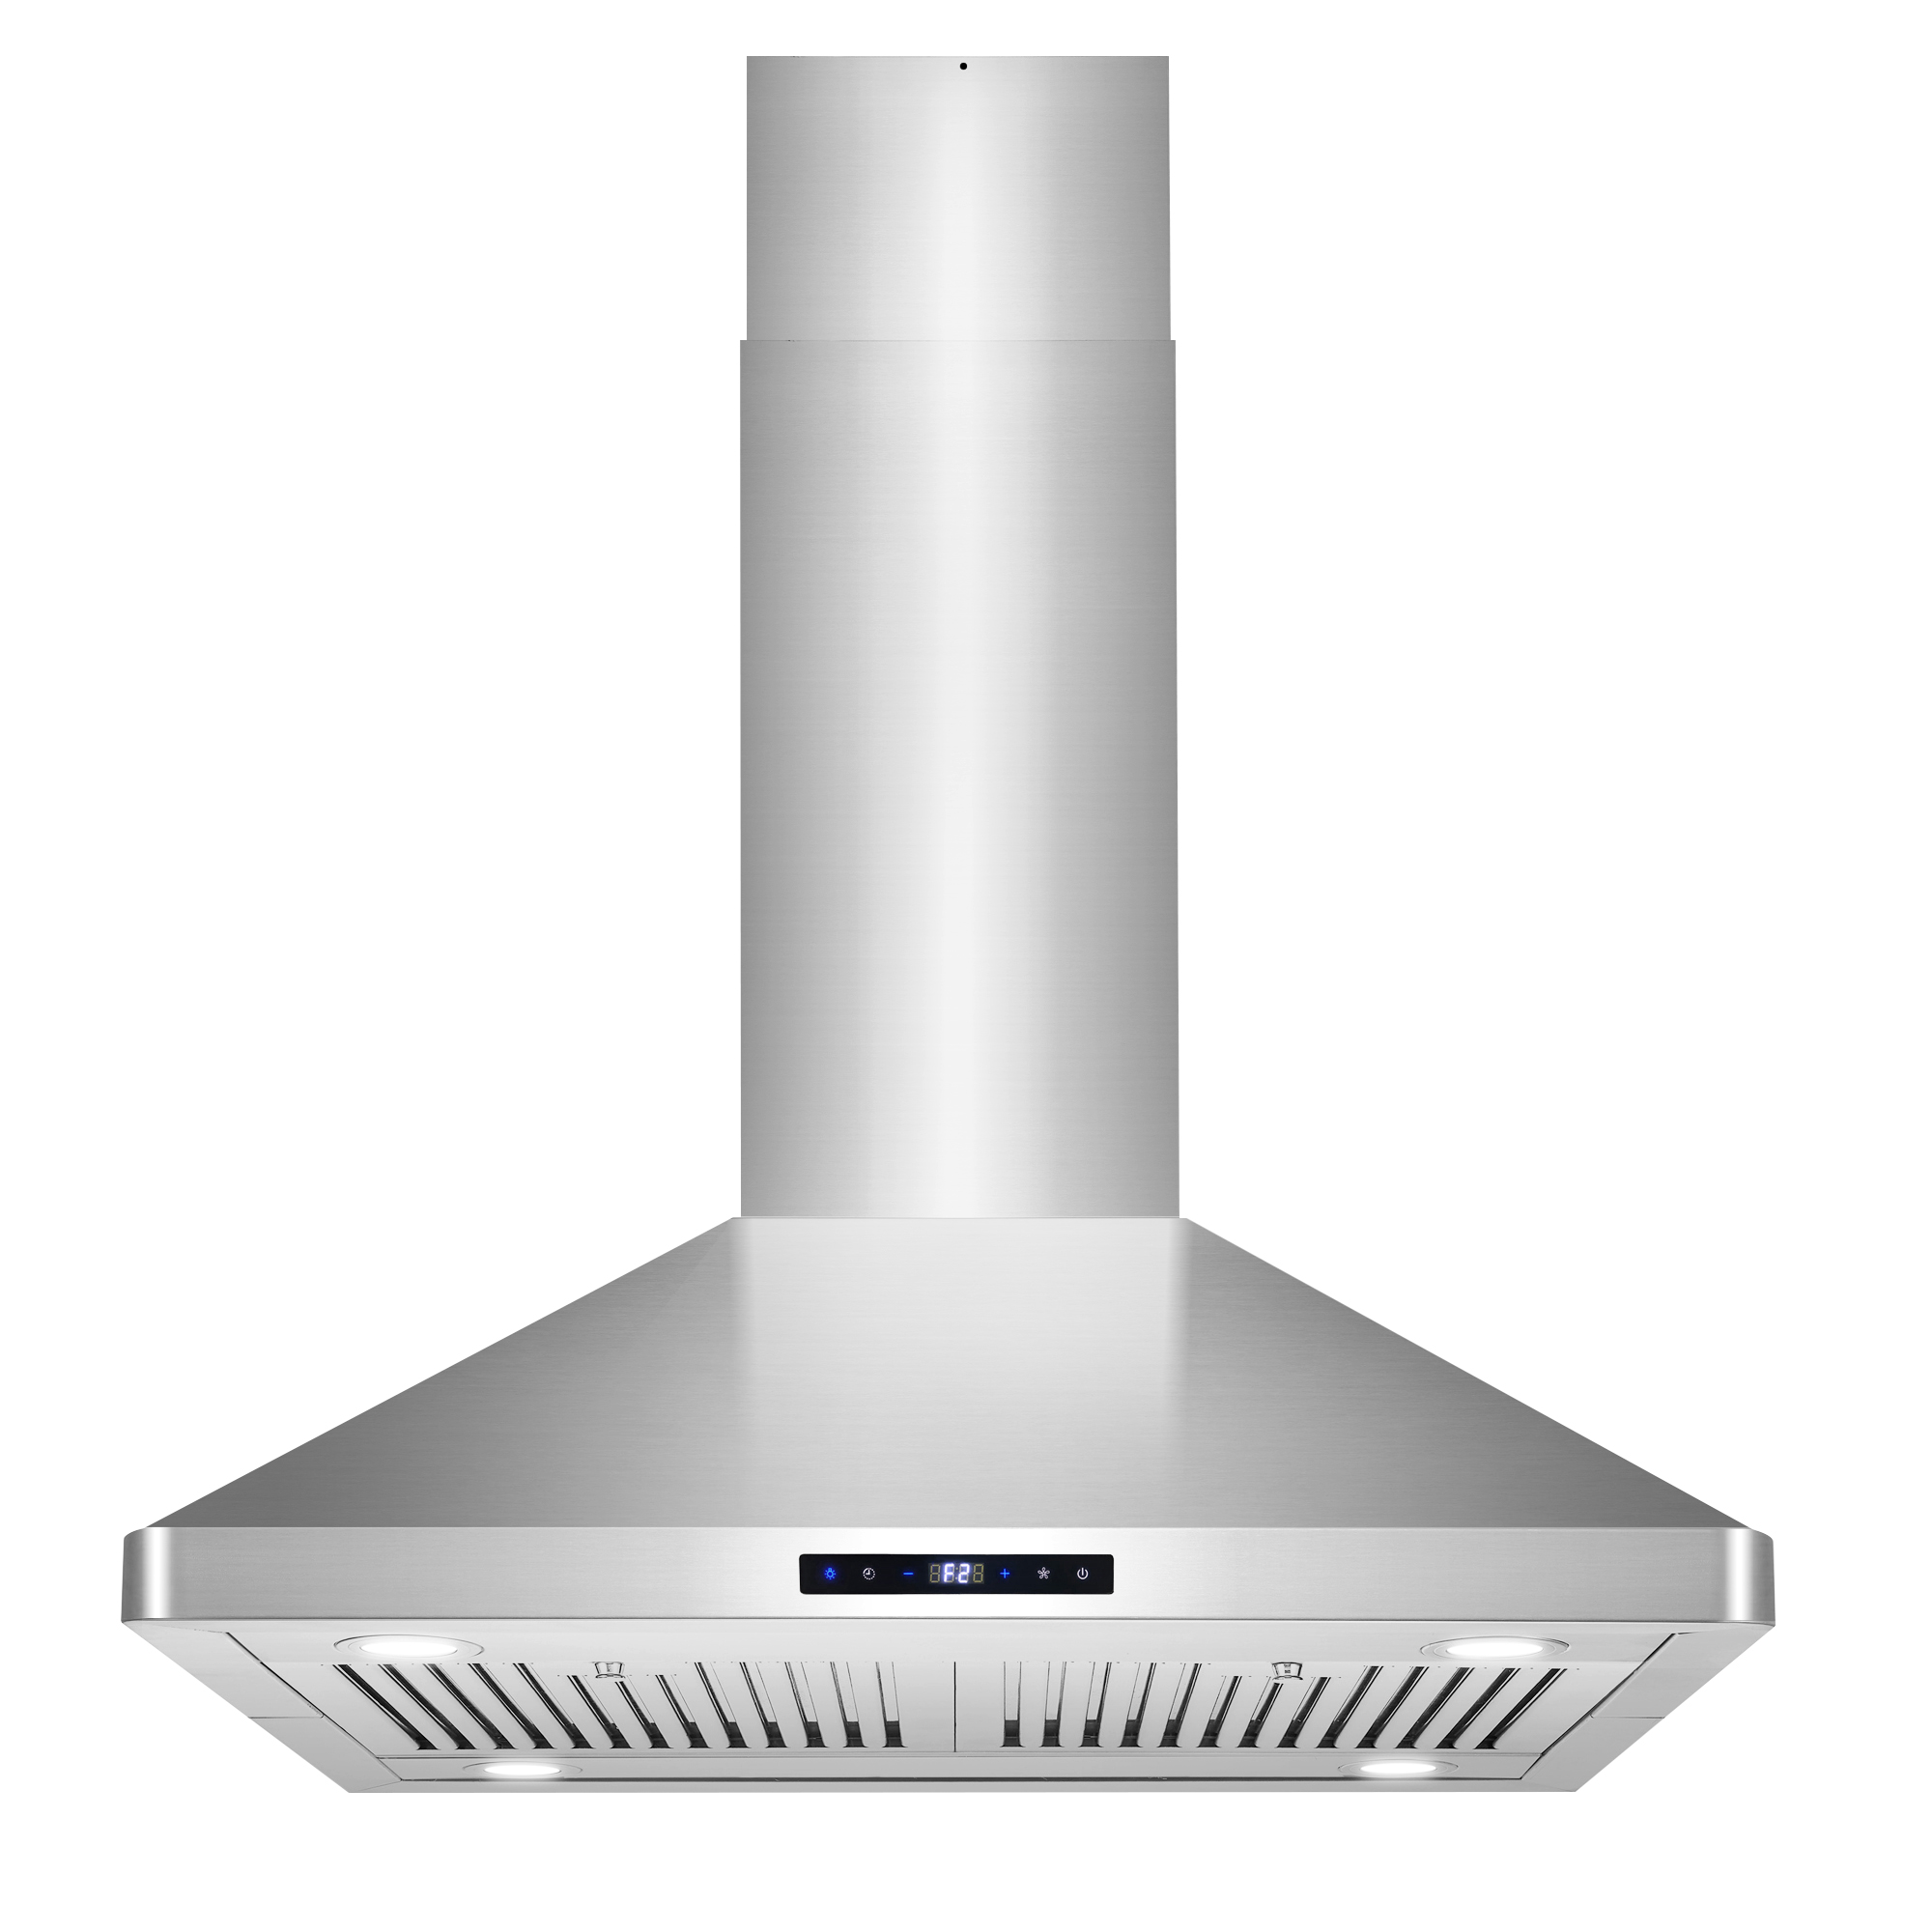 COS-668ICS750, 30″ Stainless Steel Island Range Hood with Digital Touch  Controls, Glass Canopy